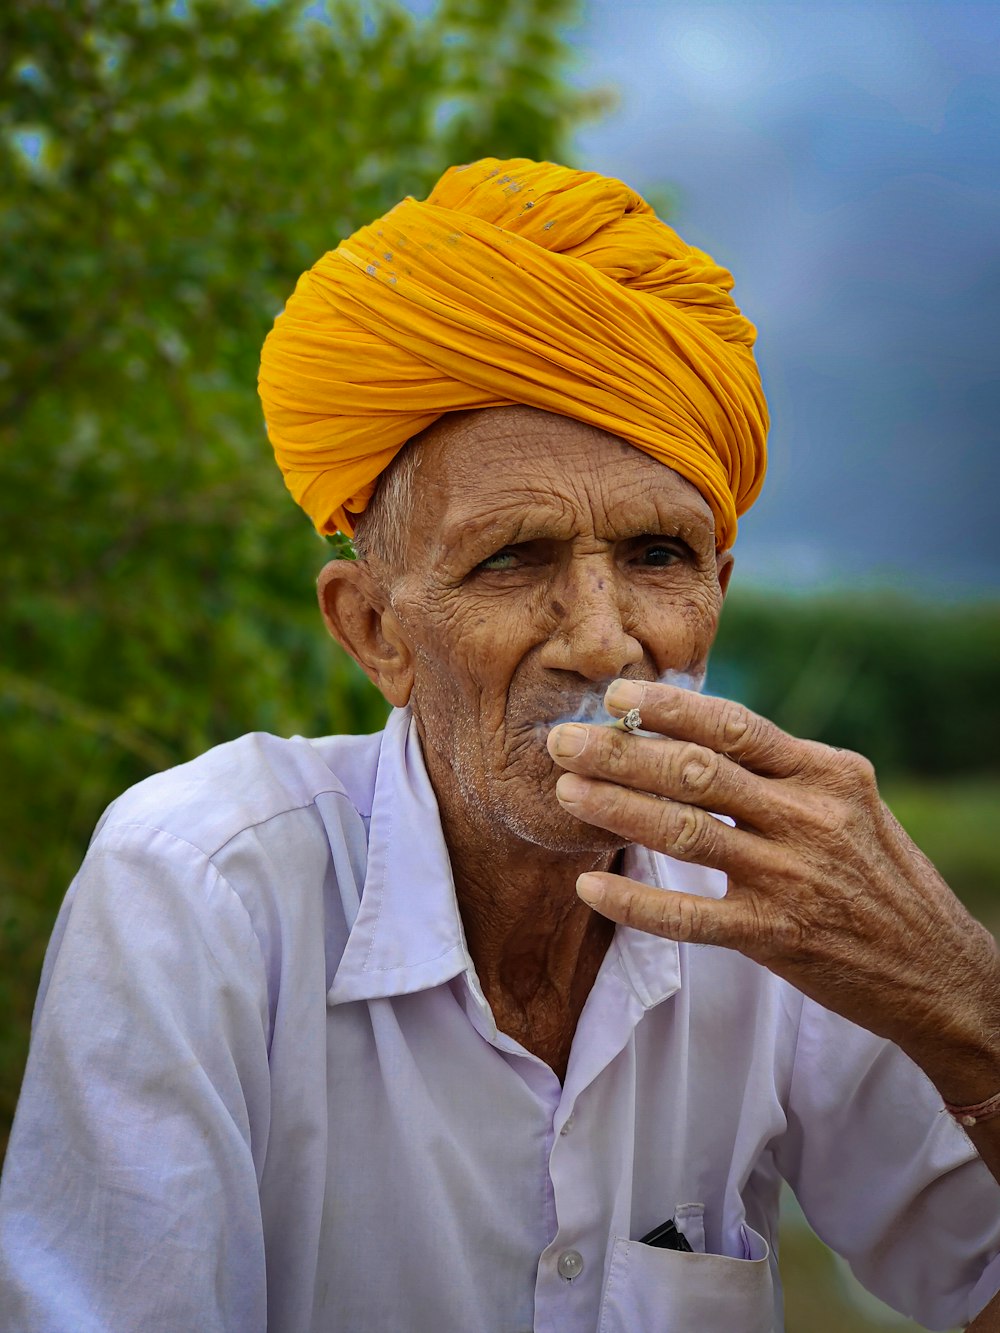 a man with a yellow turban smoking a cigarette